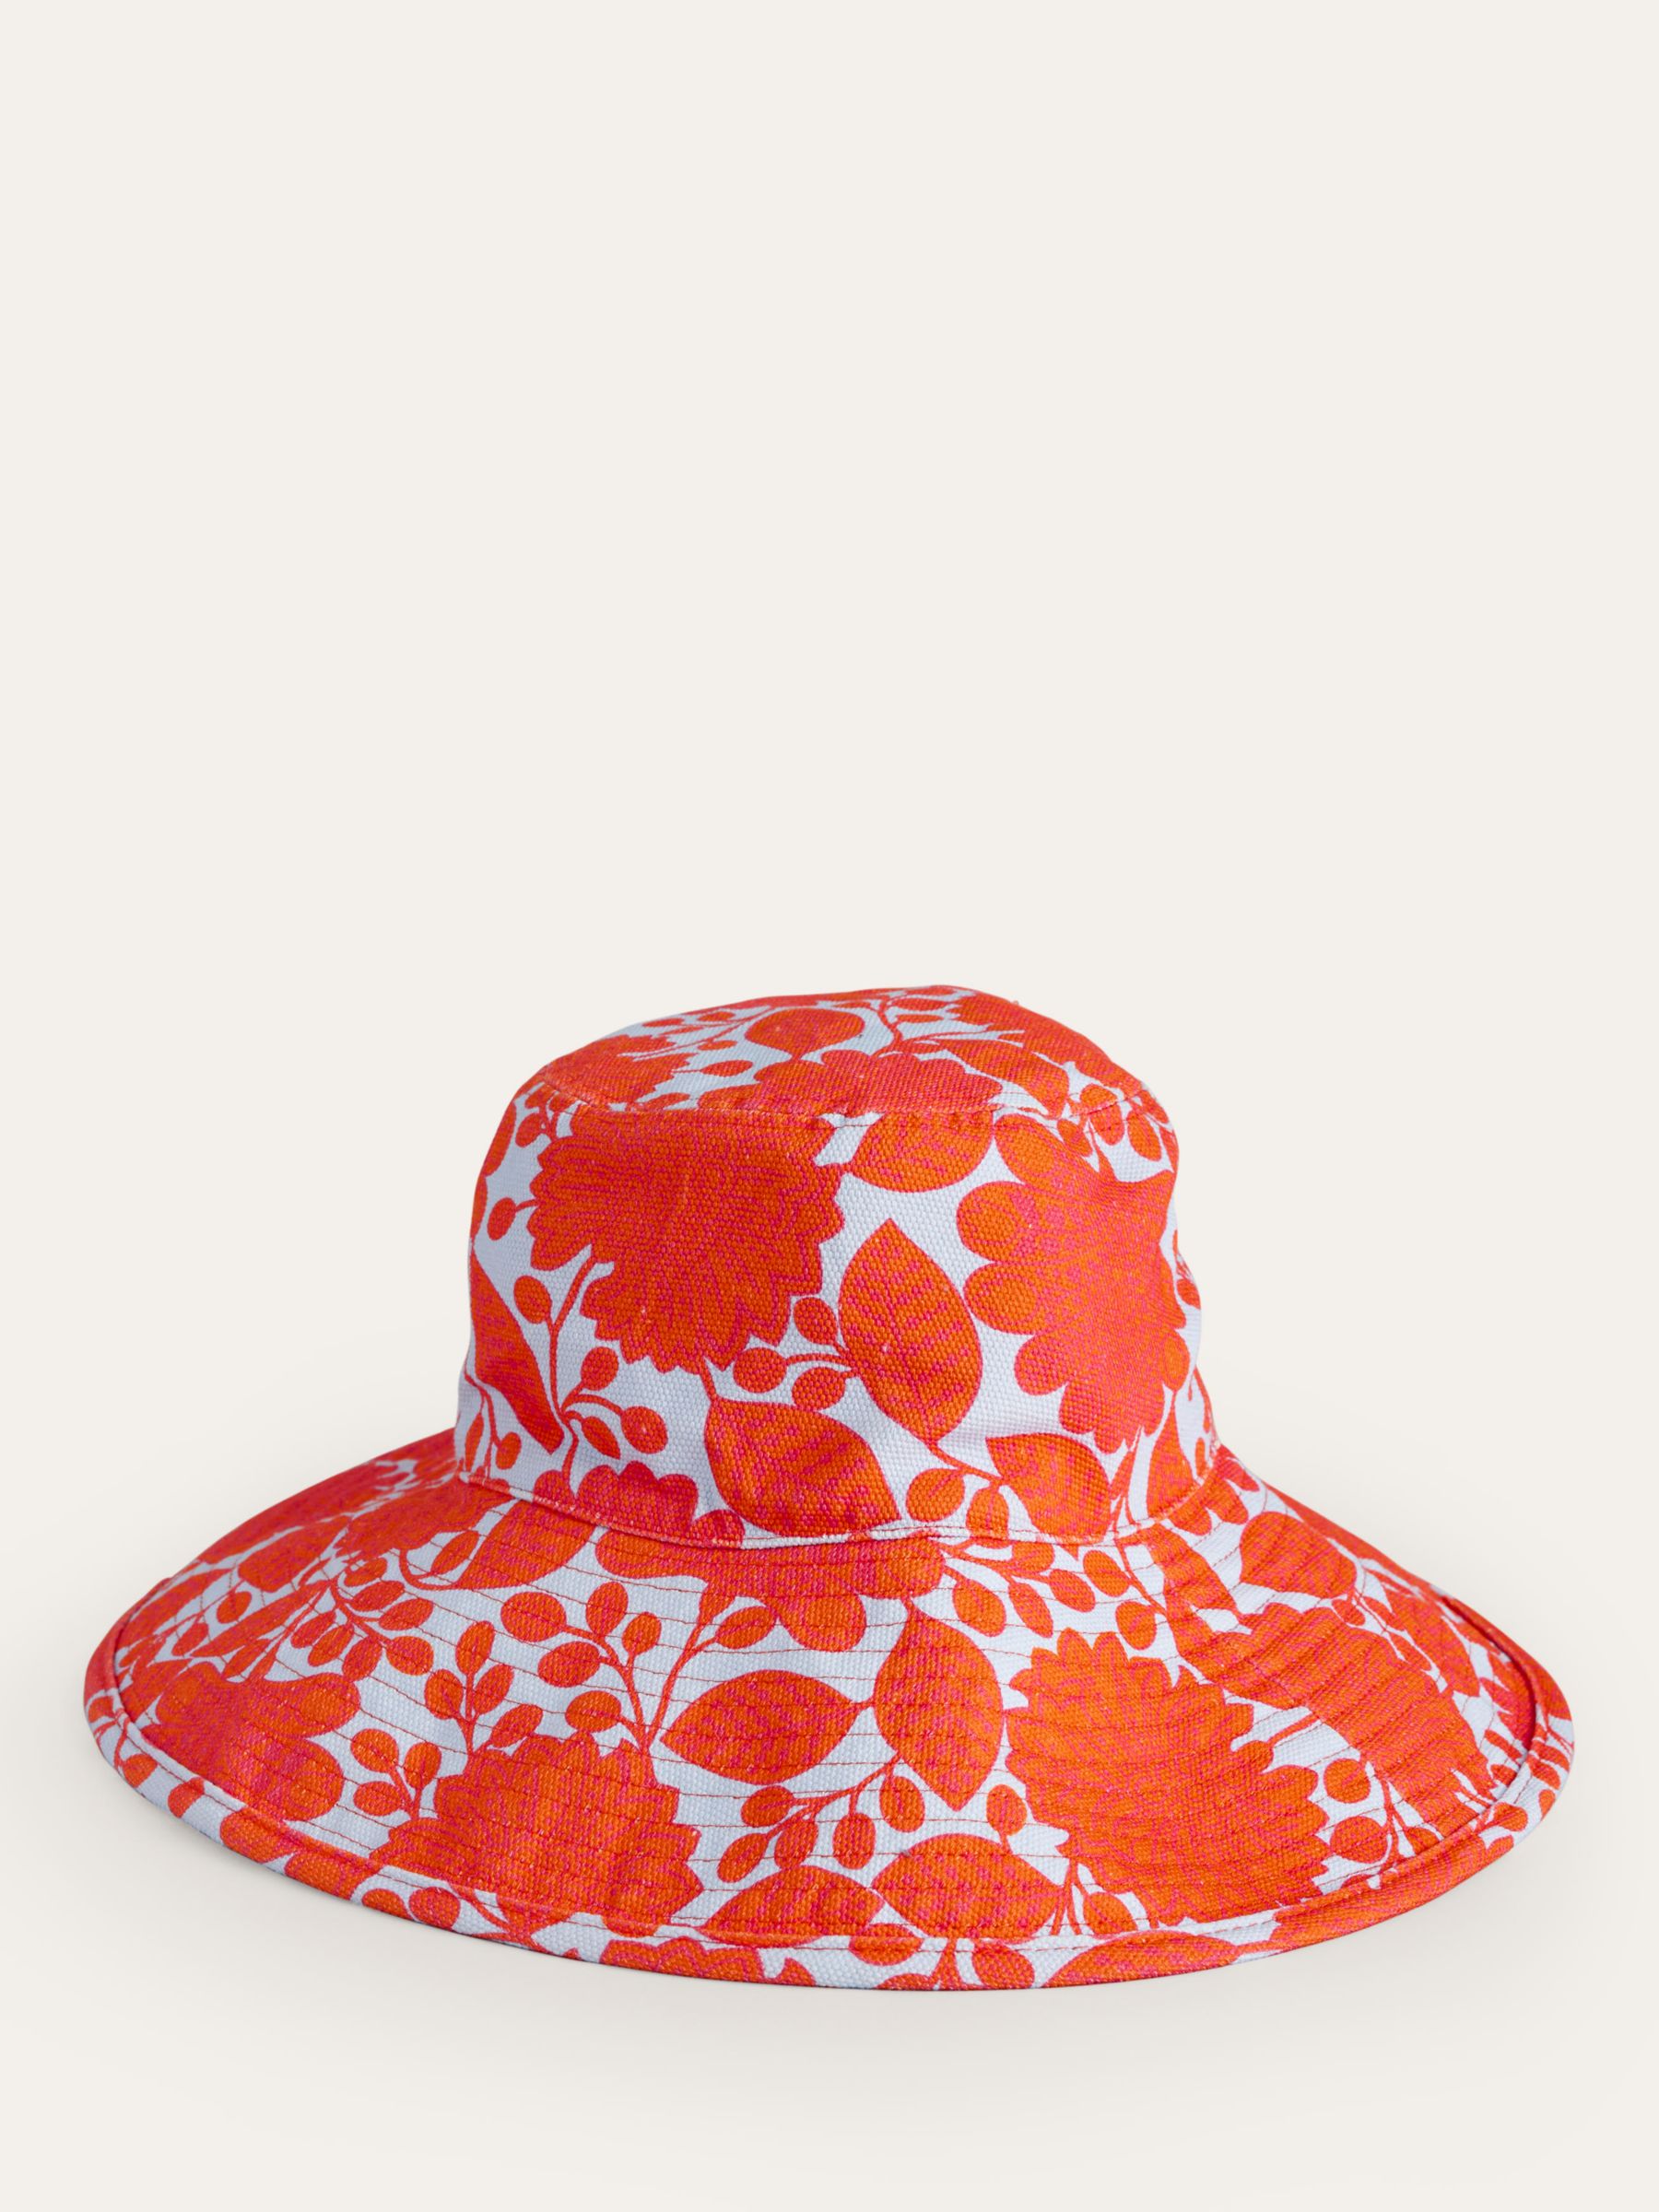 Boden Abstract Floral Print Canvas Bucket Hat, Firecracker Swirl, One Size